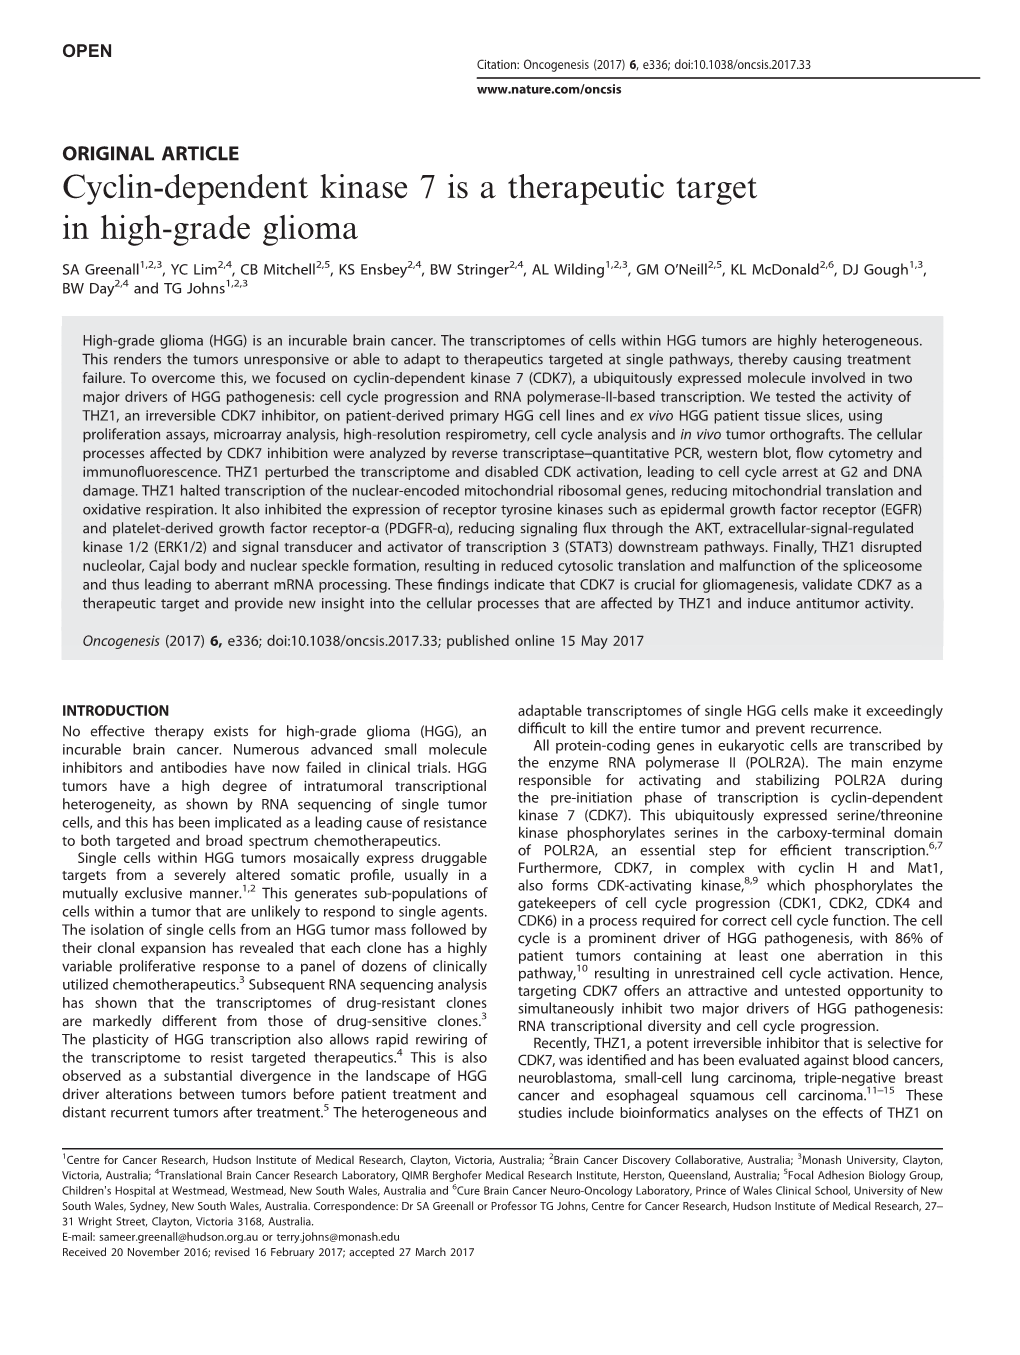 Cyclin-Dependent Kinase 7 Is a Therapeutic Target in High-Grade Glioma